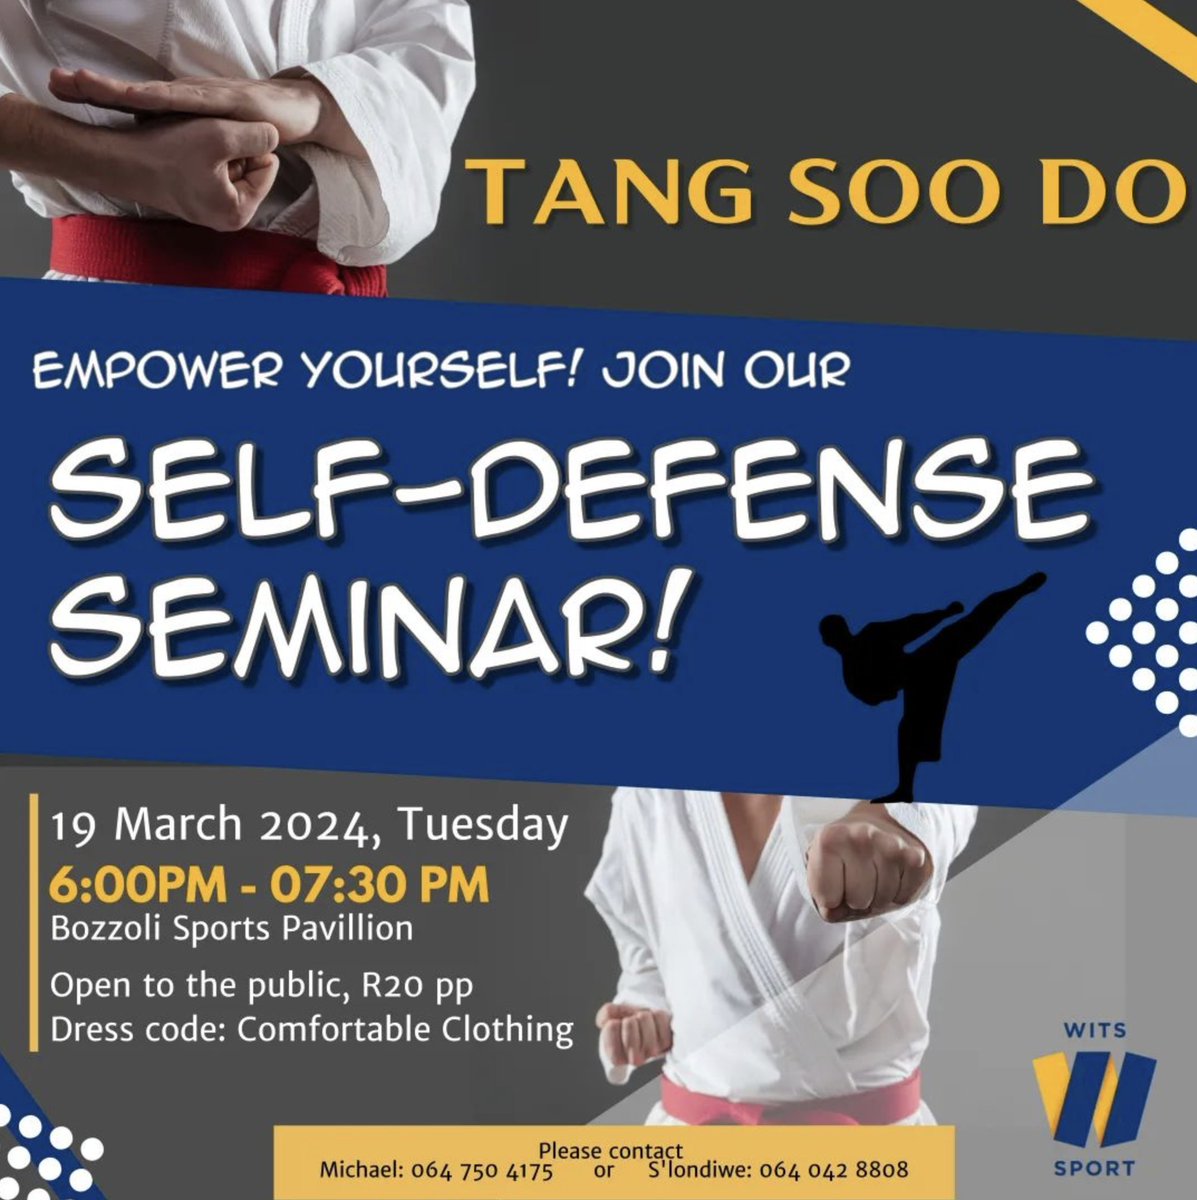 SELF DEFENSE SEMINAR | TANG SOO DO Don't miss out on our Tang Soo Do self-defense seminar on March 19, 2024, at 6pm! Boost your confidence and learn essential skills for just R20 per person. Check the poster for contact details. #WitsForGood